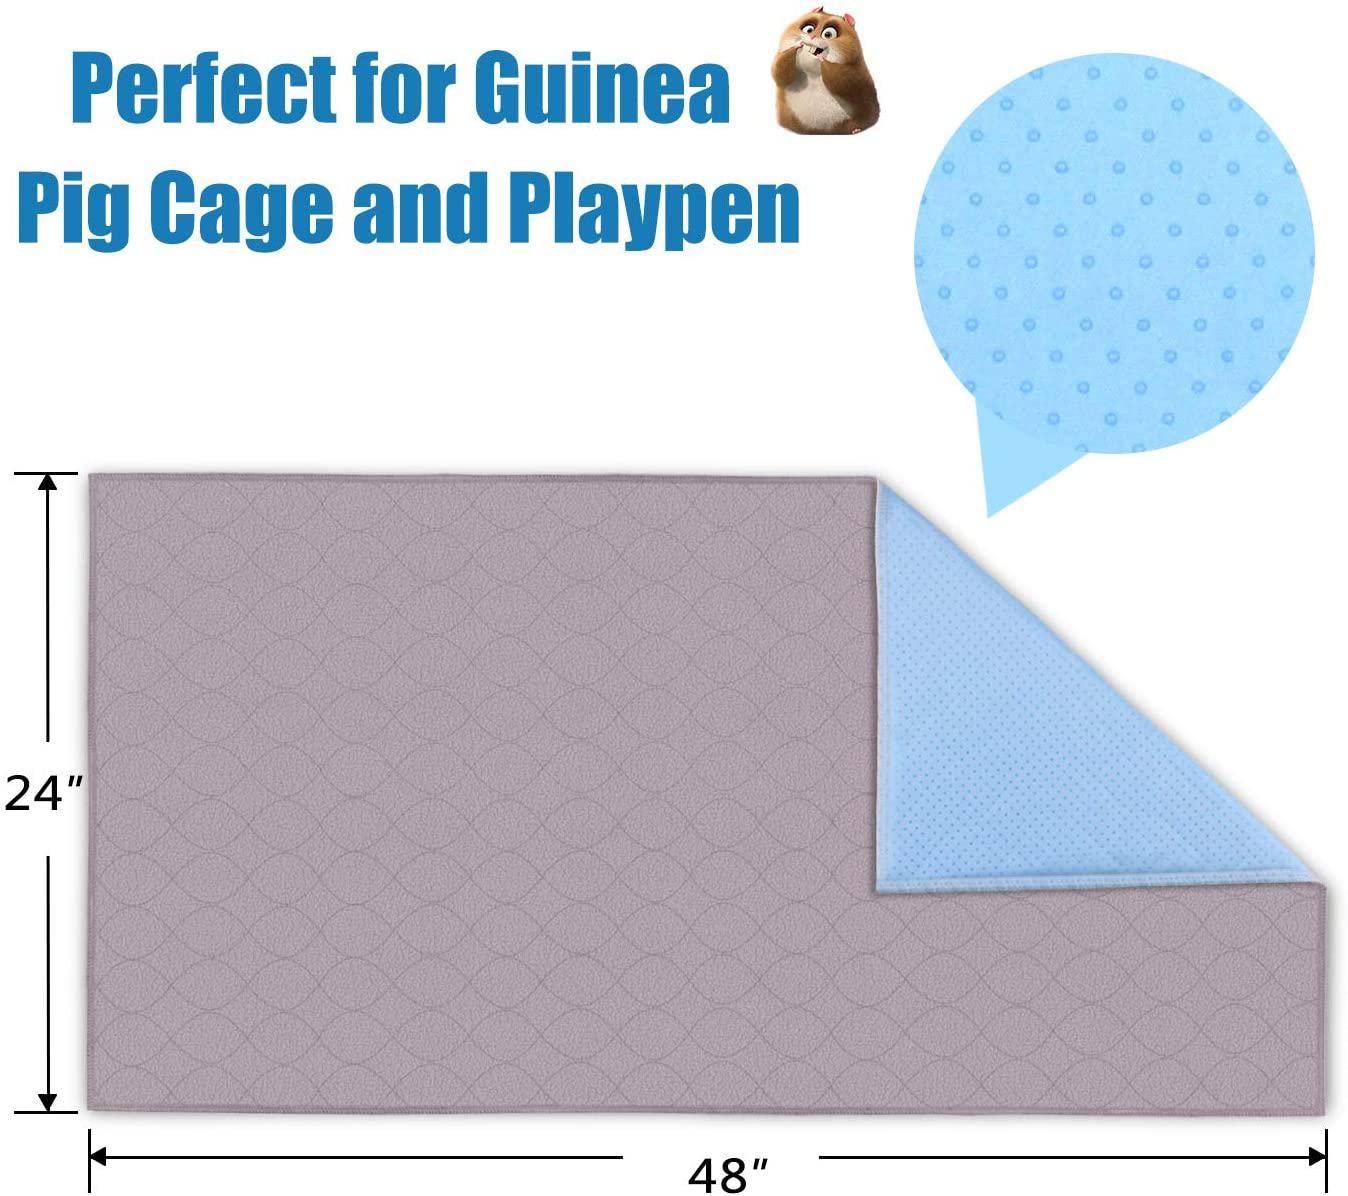 Uteuvili 2 Pack Guinea Pig Fleece Cage Liners Guinea Pig Bedding Washable Waterproof Reusable anti Slip Super Absorbent Pee Pad for Small Animals 24"X 48"